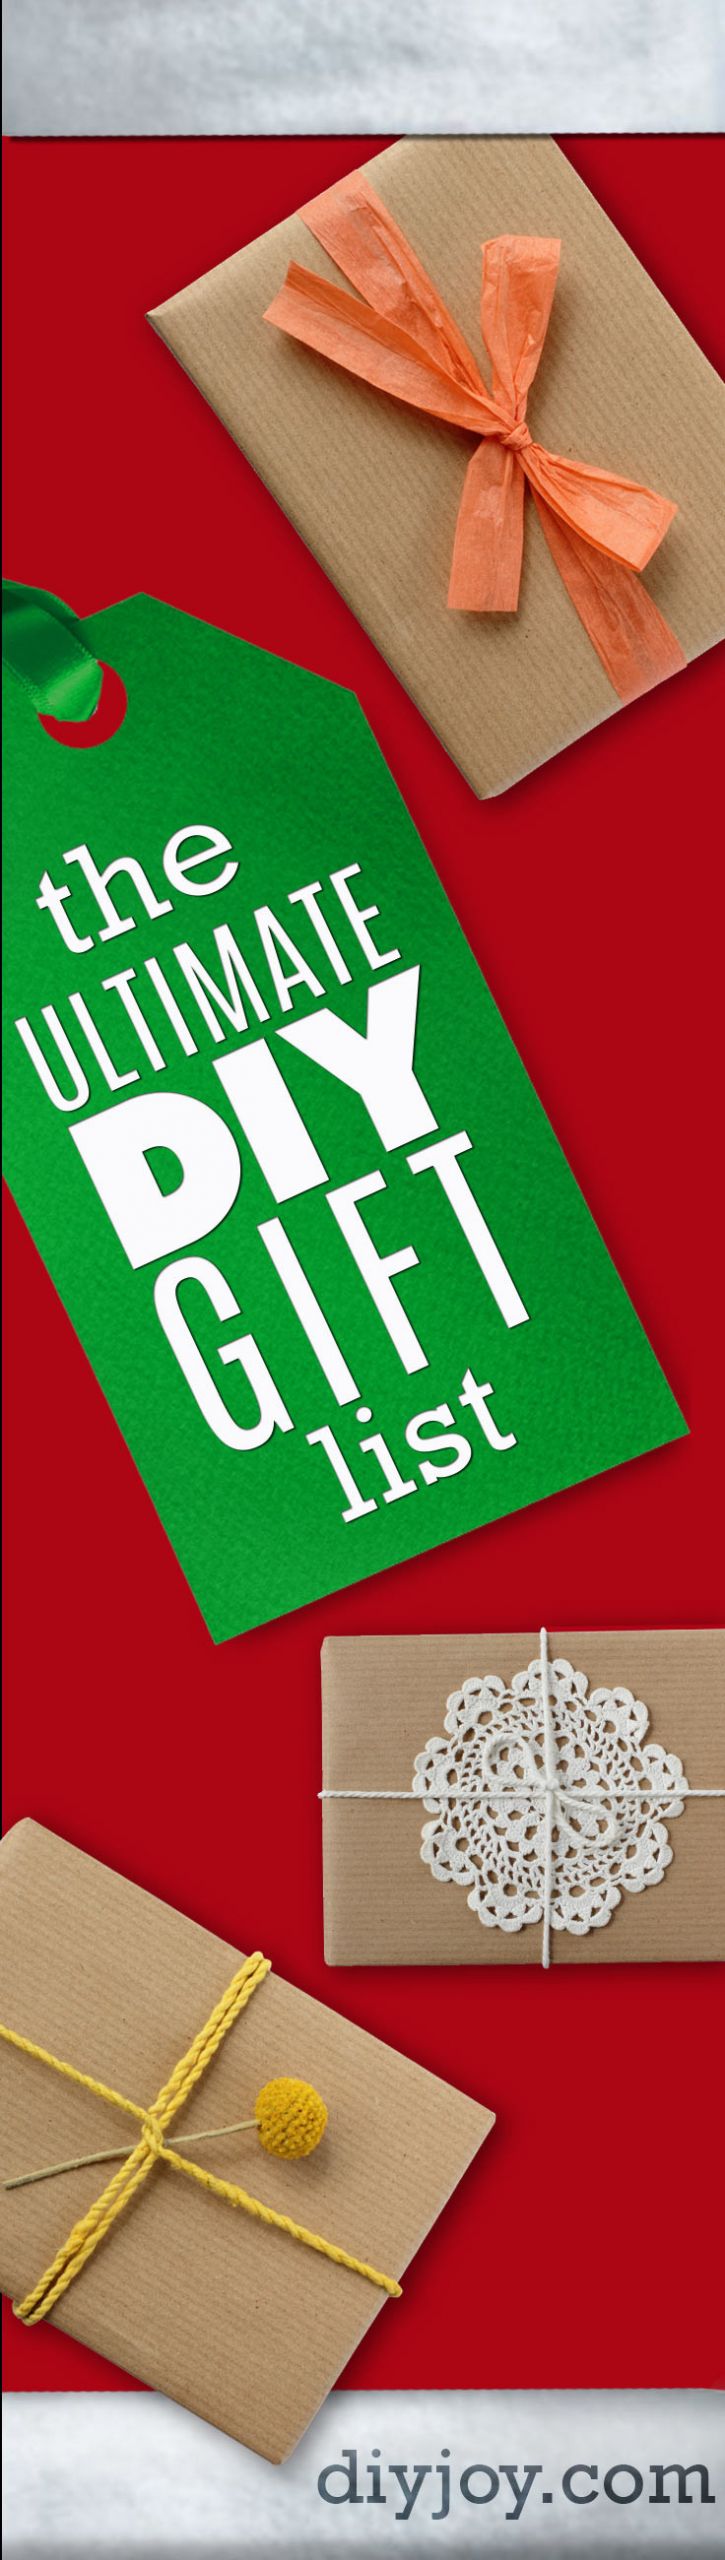 Christmas Gift Ideas For Boyfriends Mom
 The Ultimate DIY Christmas Gifts list